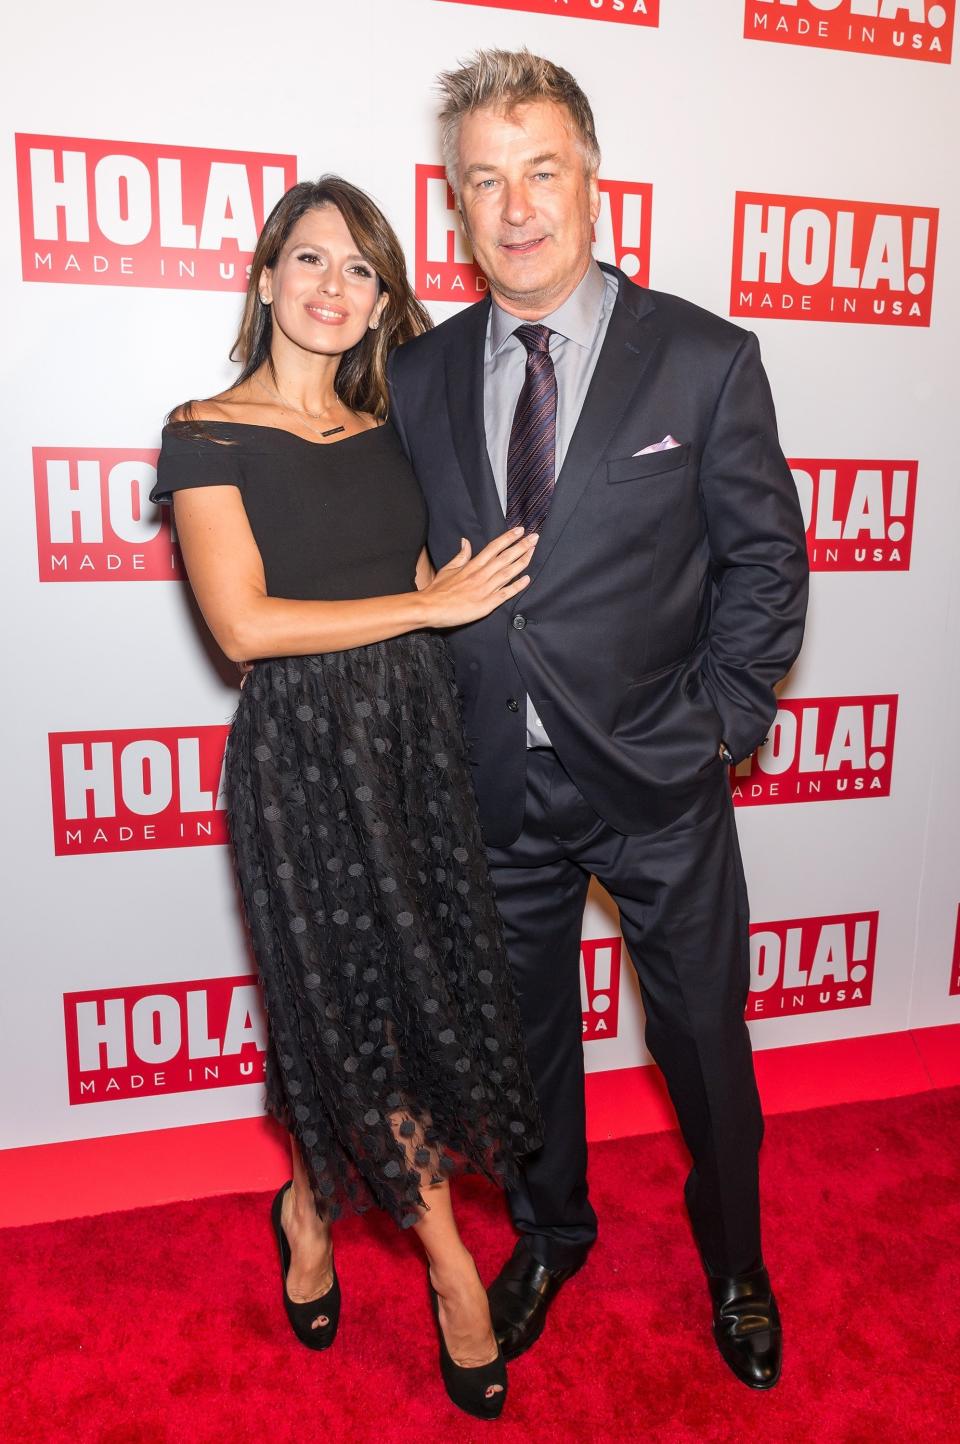 Hilaria and Alec Baldwin stand together at an event